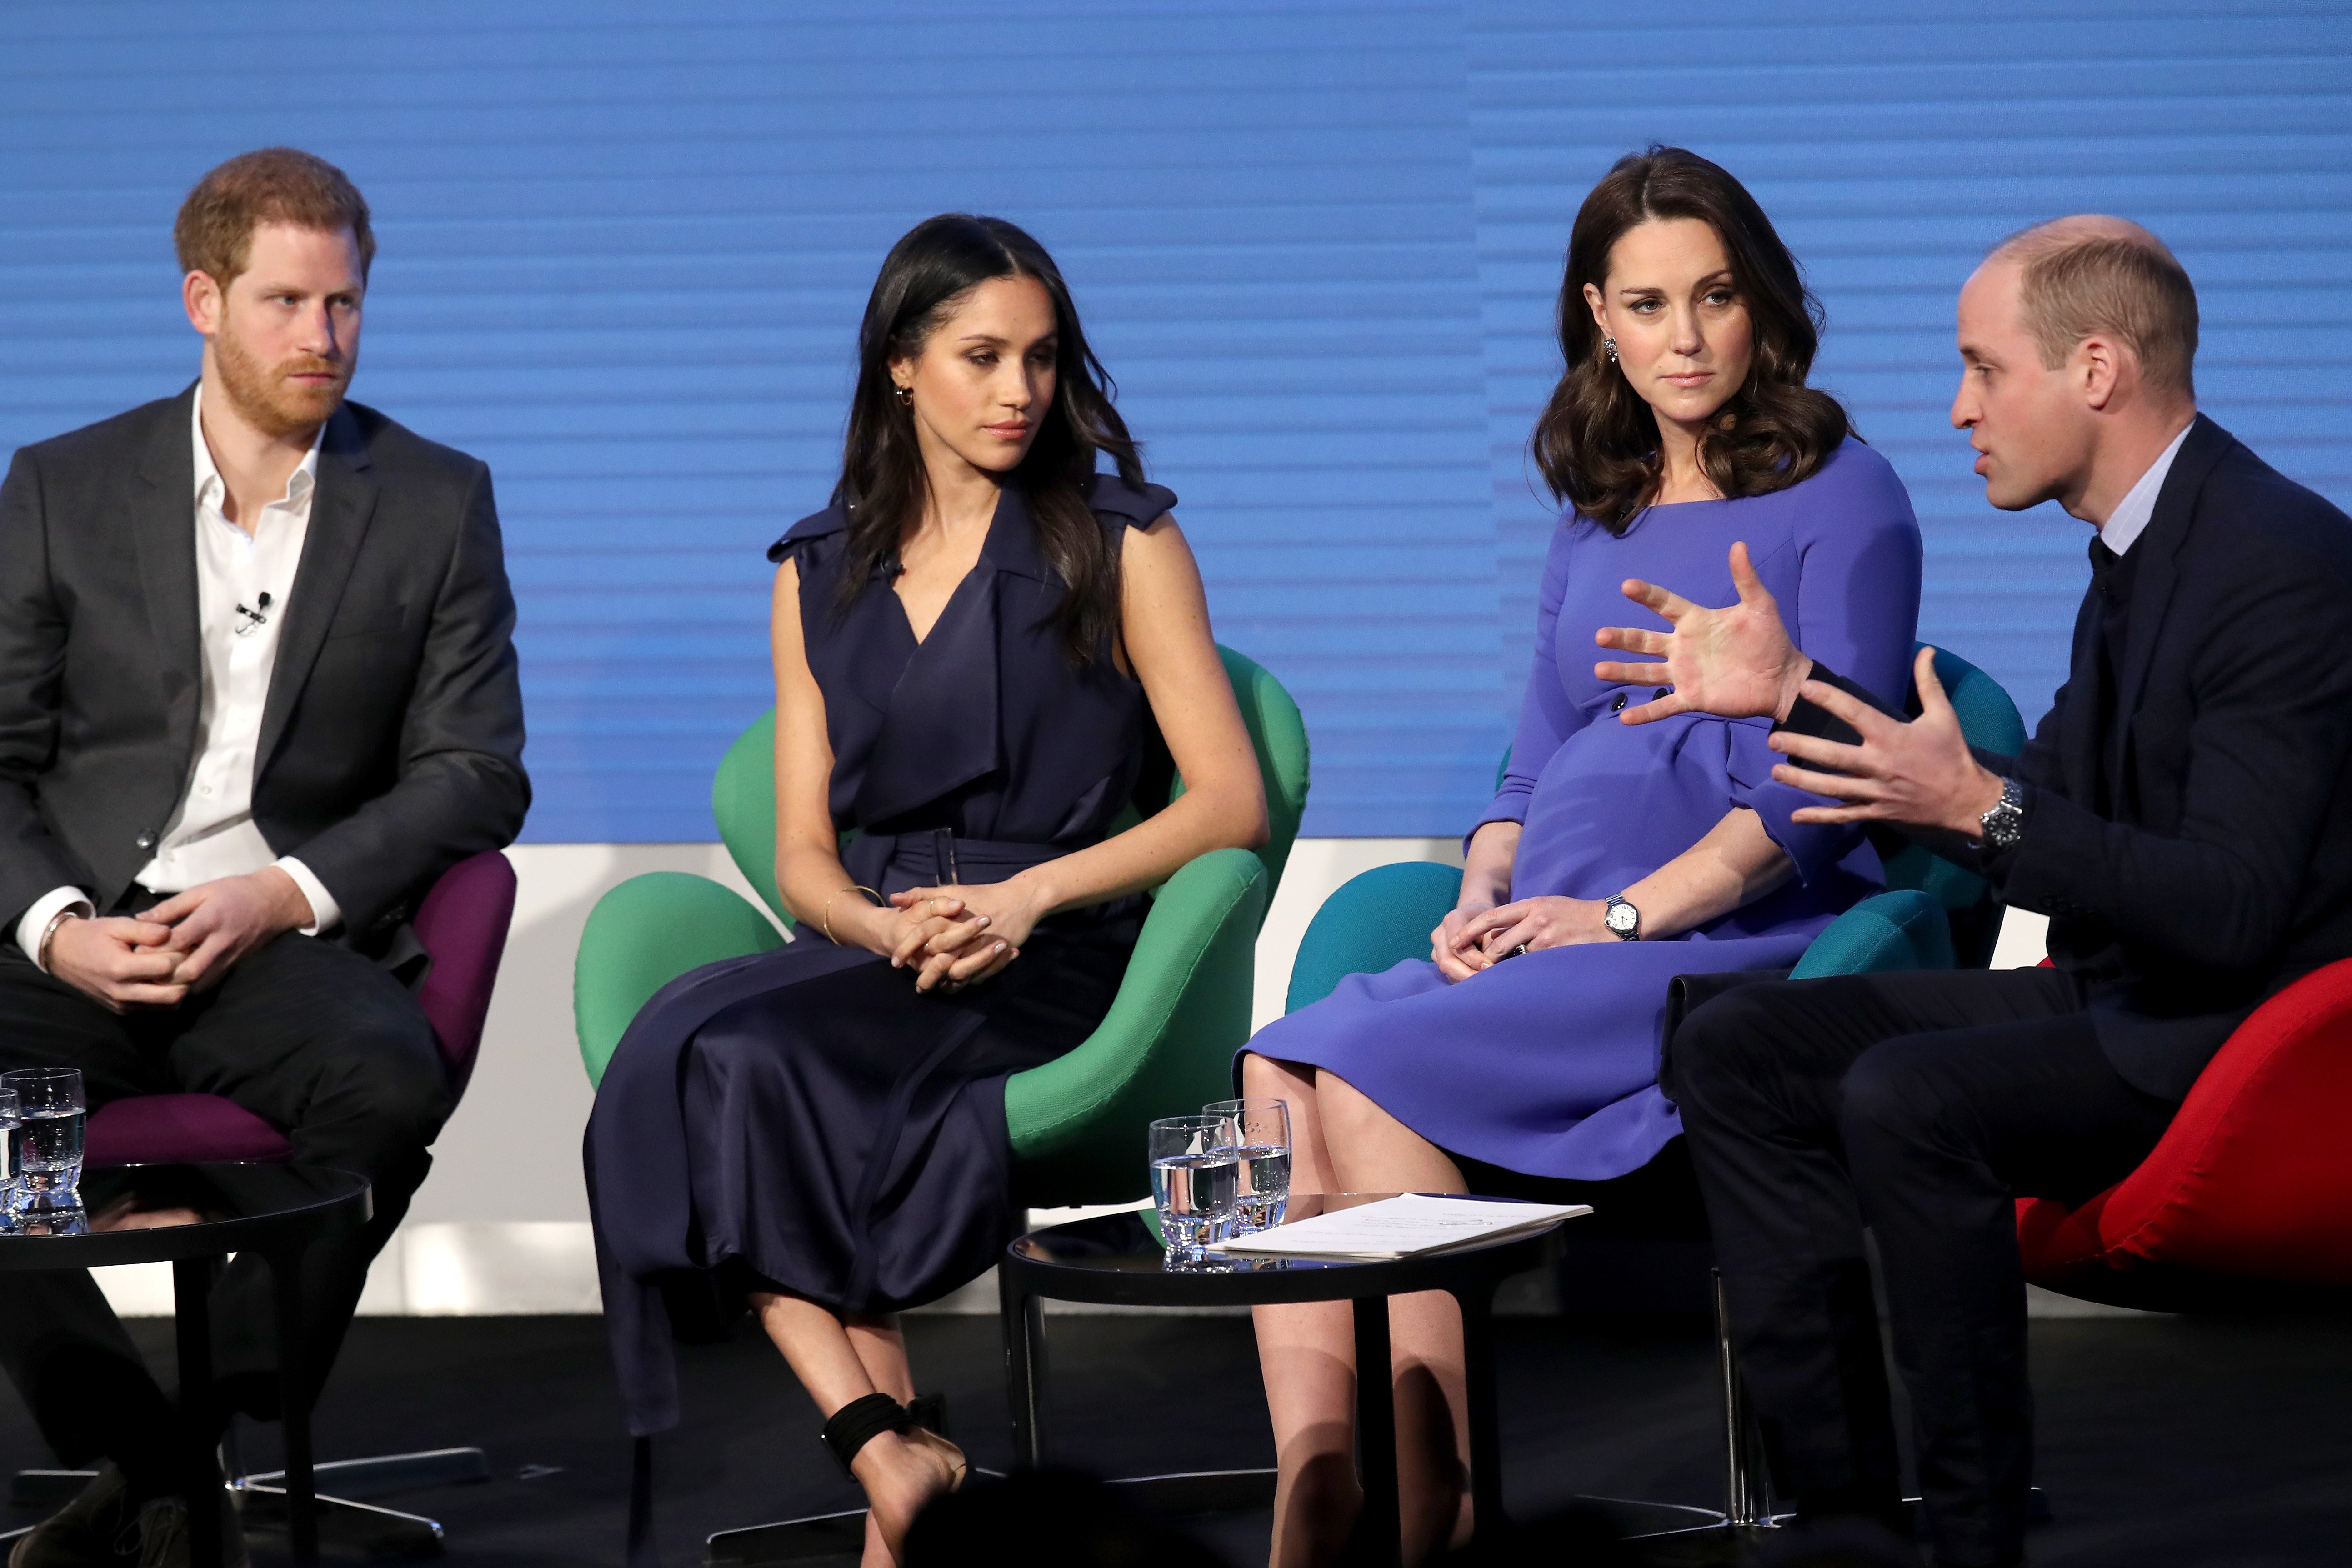 Britain's Prince Harry, Meghan Markle, Catherine, Duchess of Cambridge and Prince William, Duke of Cambridge attend the first annual Royal Foundation Forum on February 28, 2018 in London | Source: Getty Images